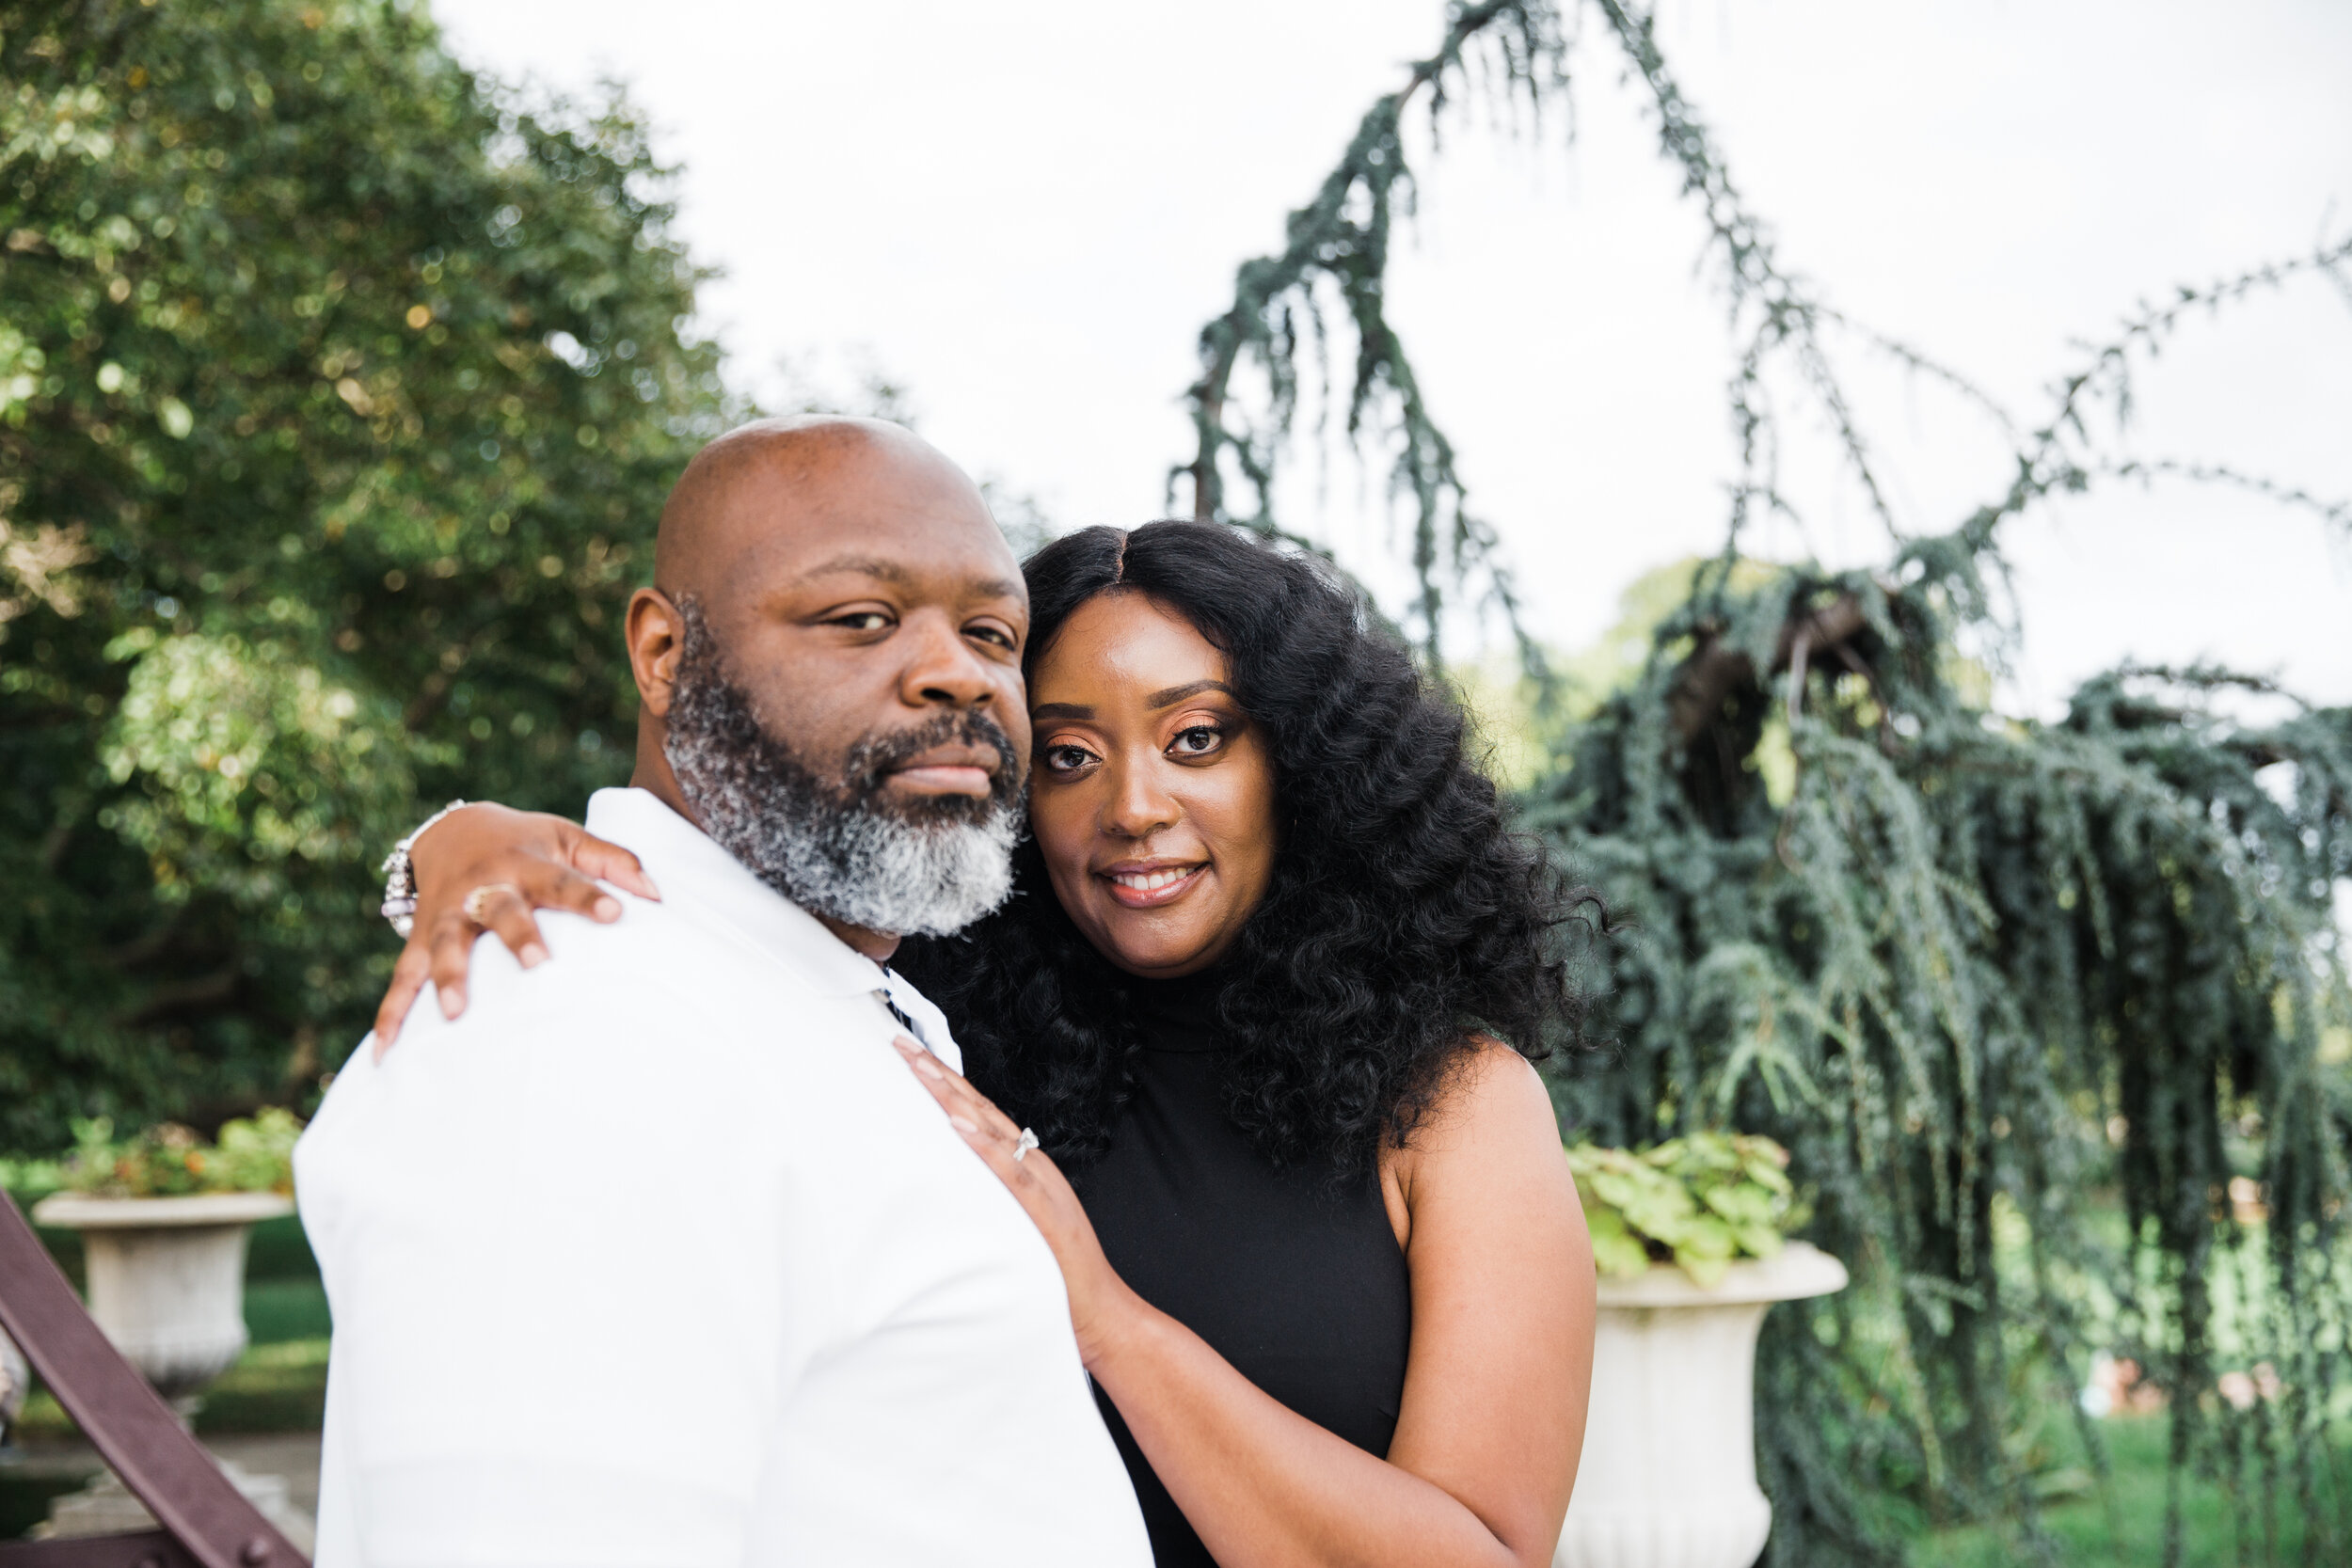 Patterson Park Engagement Session with Black Photographers Megapixels media in Baltimore Maryland (7 of 32).jpg